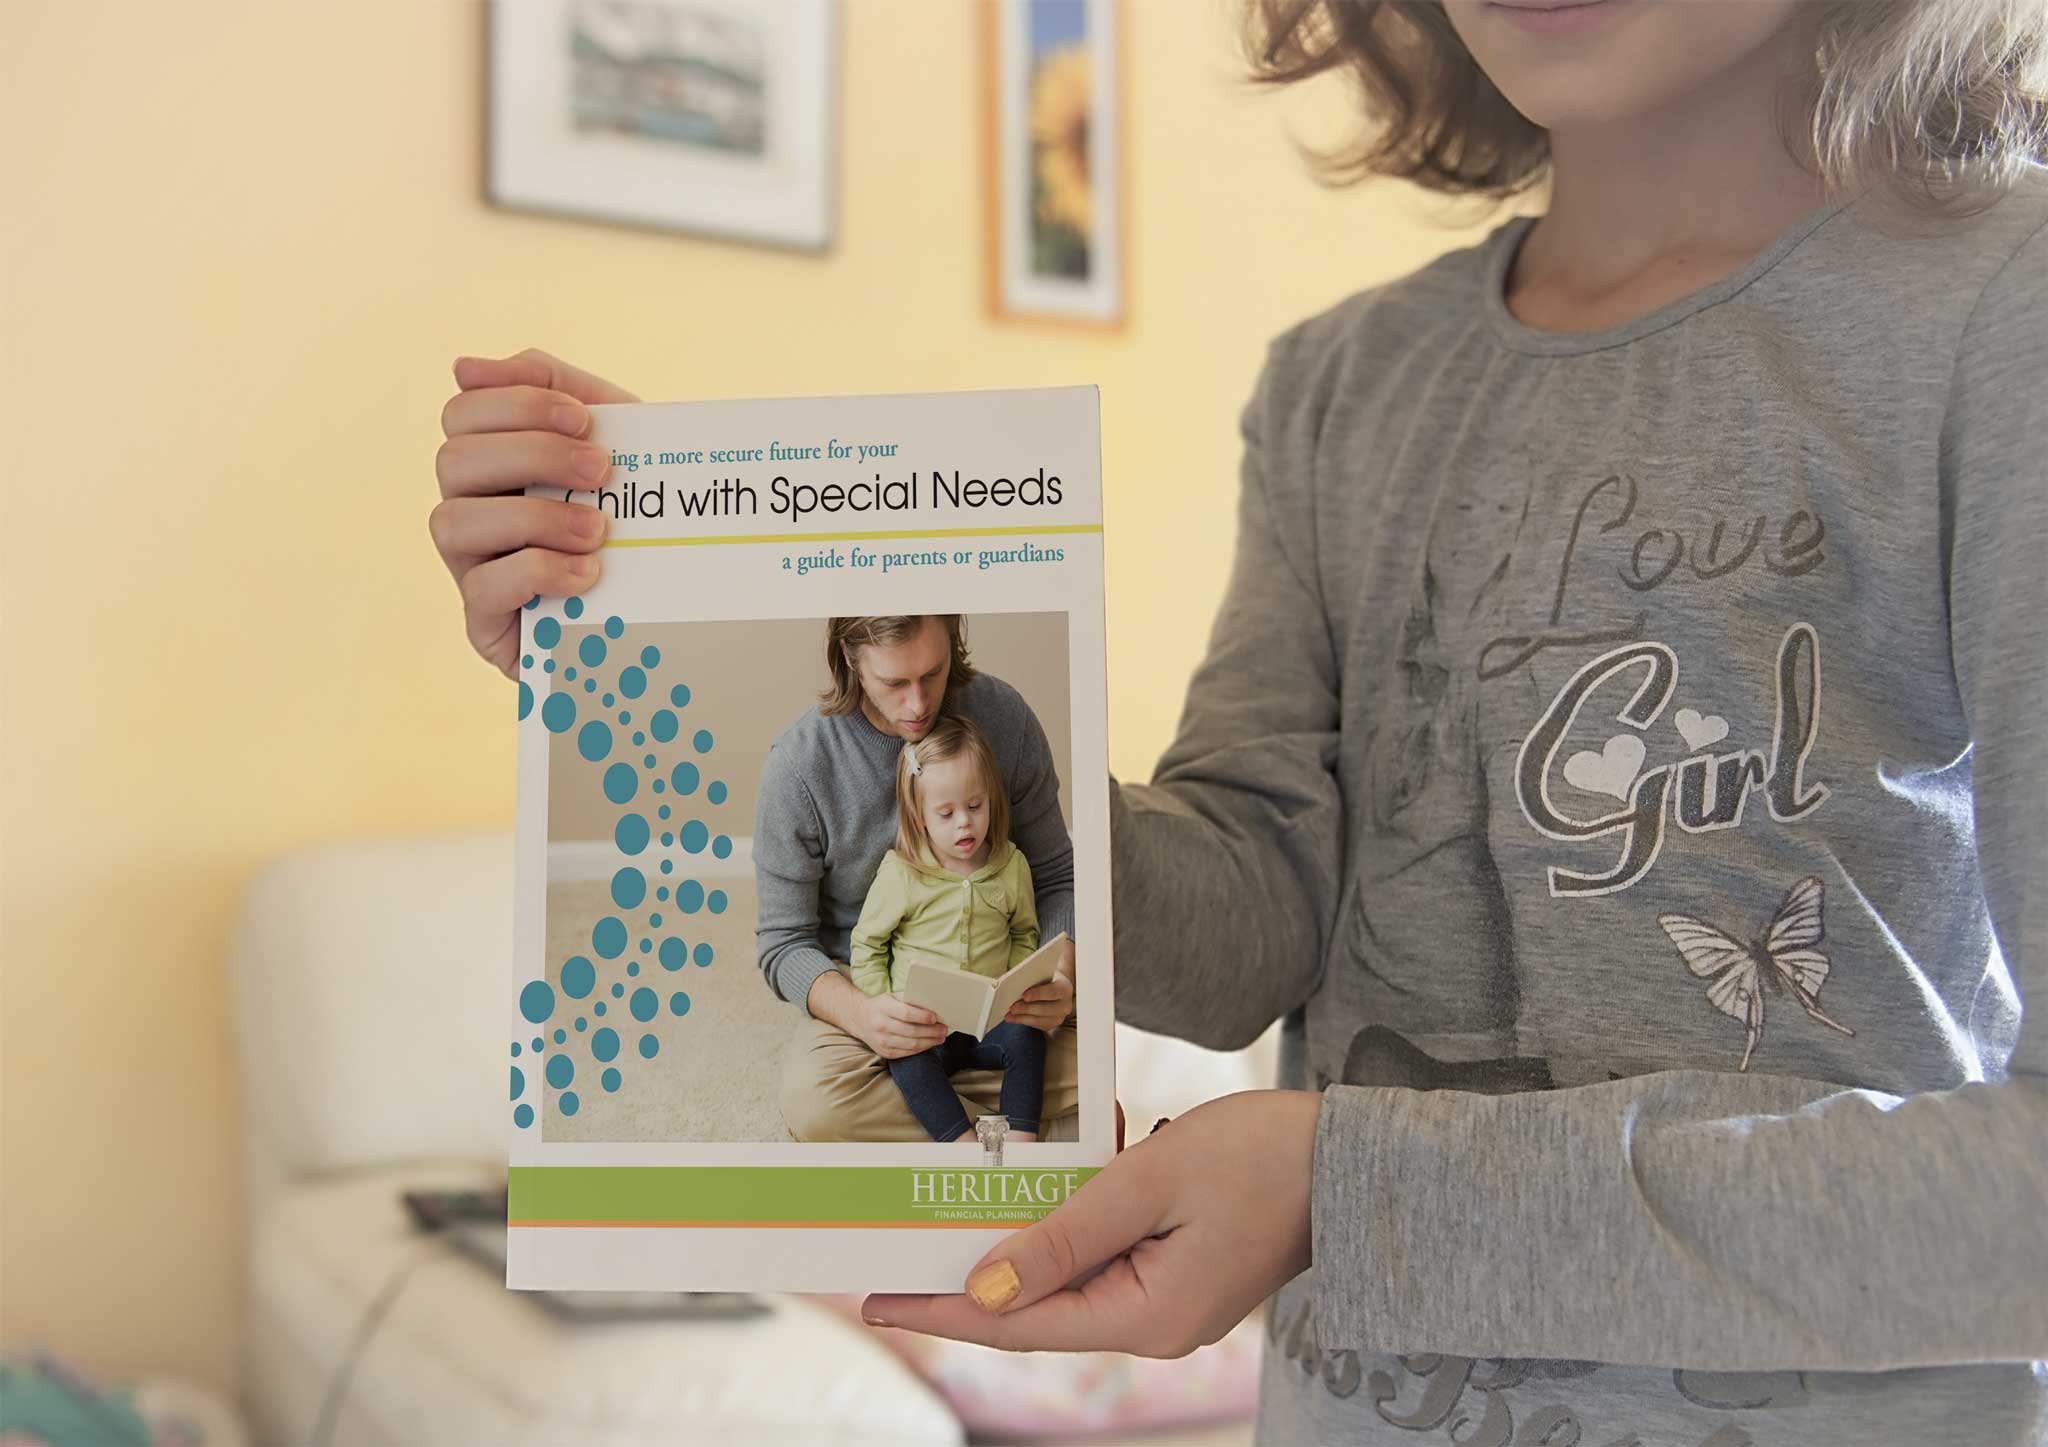 Planning a More Secure Future for Your Child with Special Needs